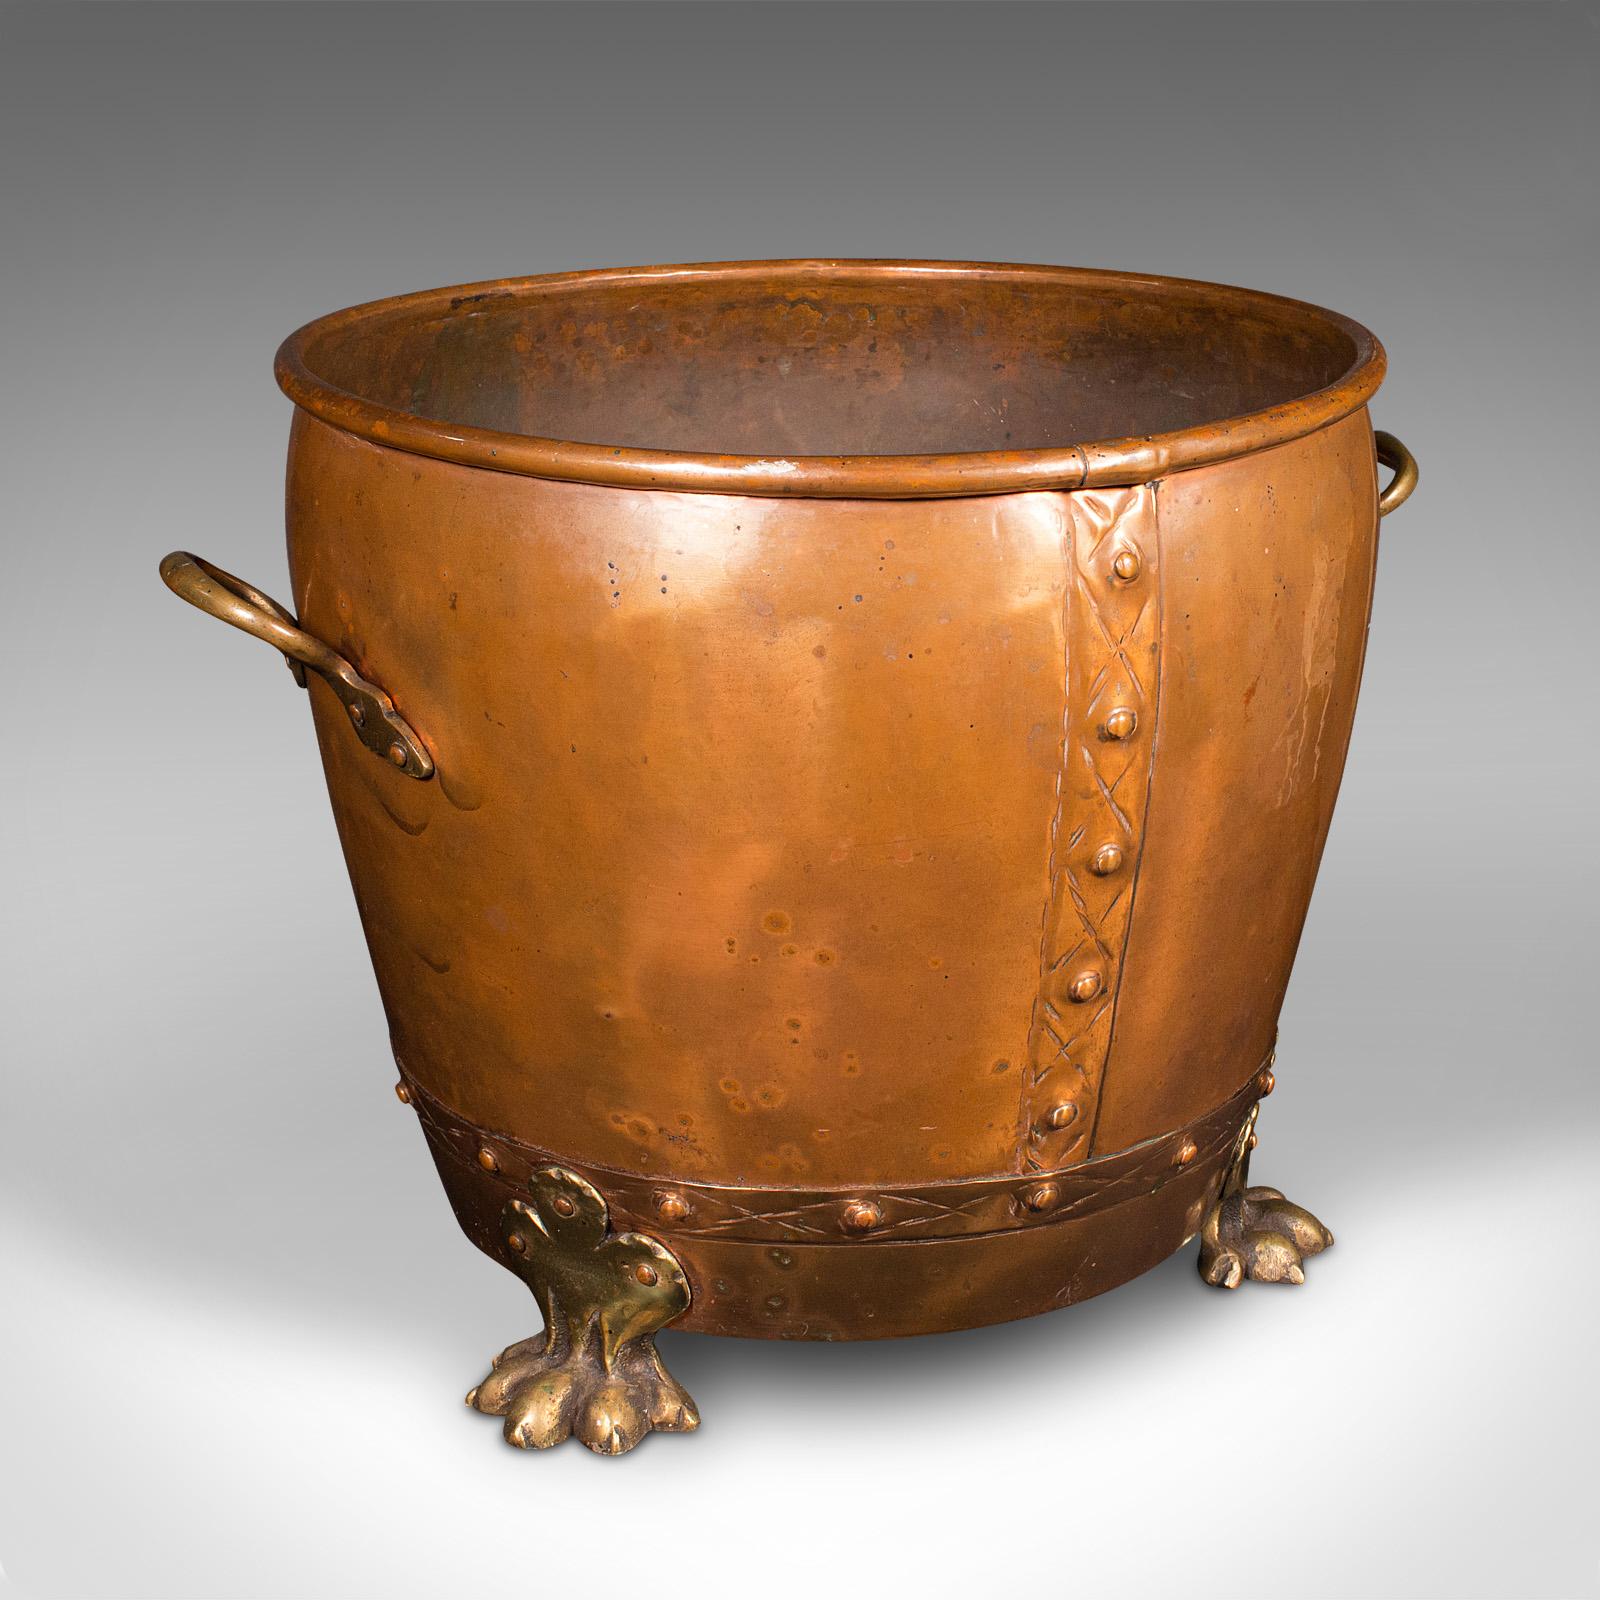 This is an antique fireside bin. An English, copper and brass coal or log bucket with lid, dating to the late Victorian period, circa 1880.

Attractive Victorian fireplace bin with appealing finish
Displays a desirable aged patina in good